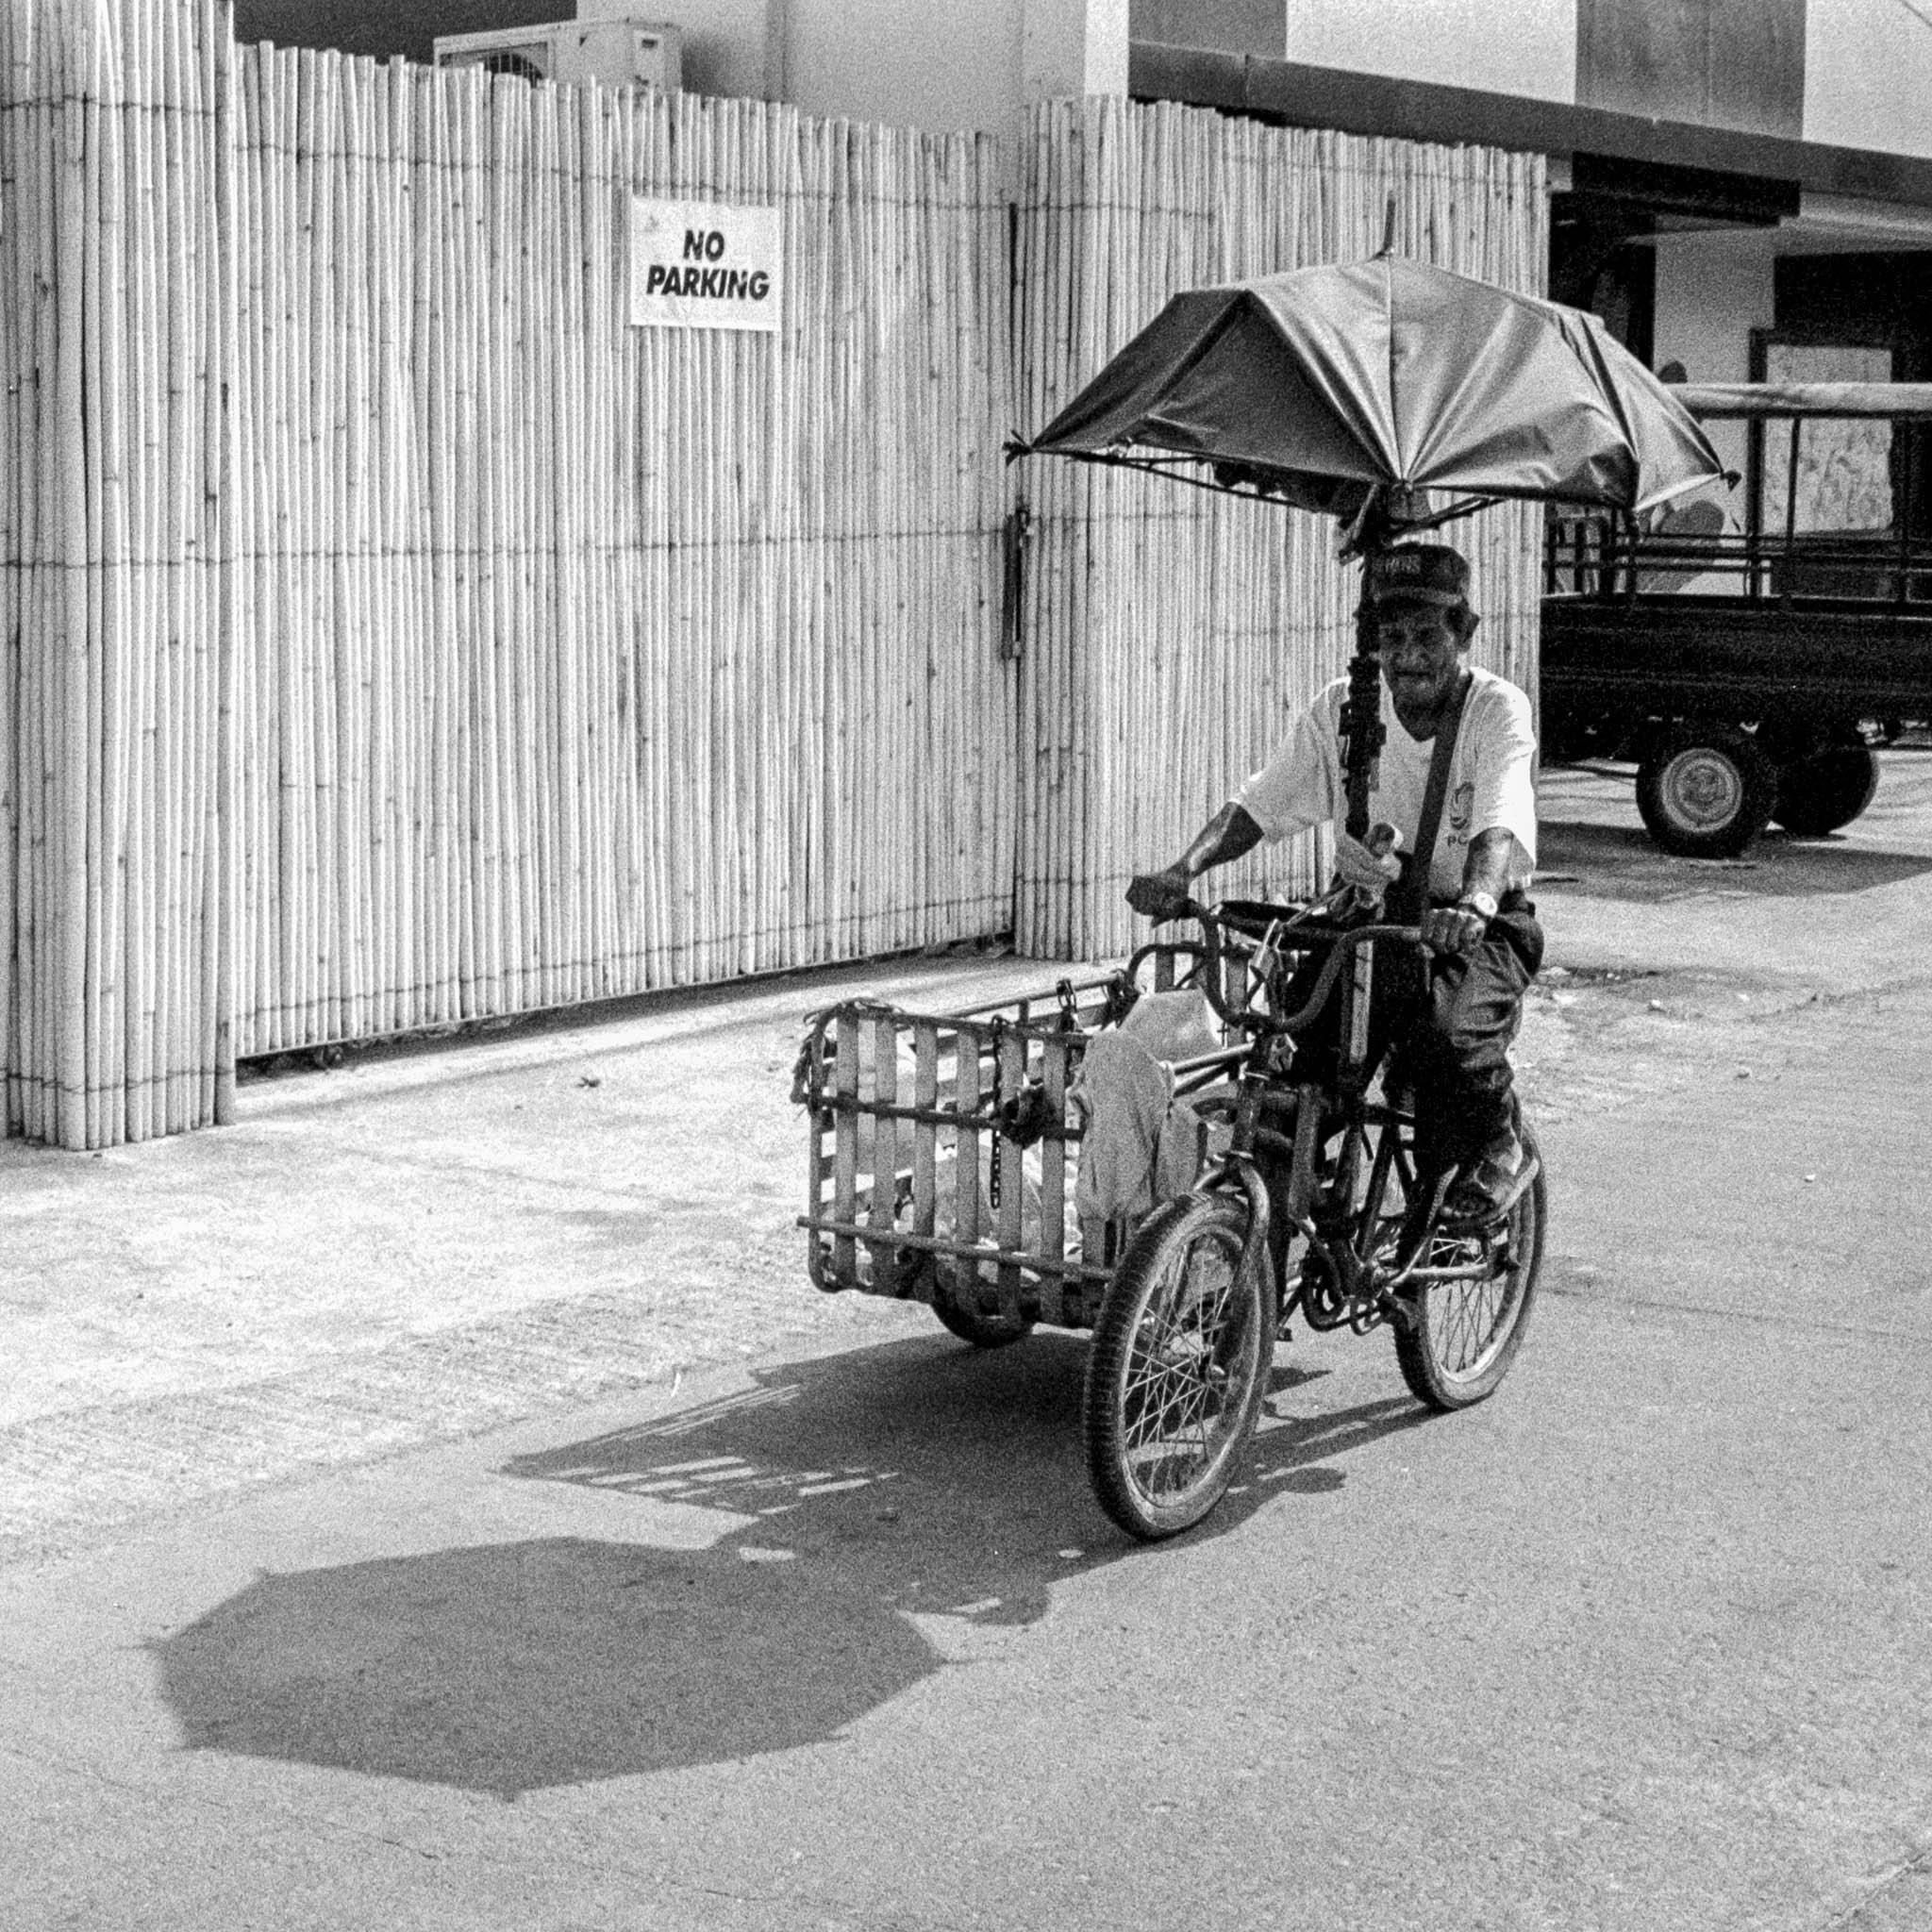 Vintage street vendor selling drinks from a bicycle on a mid-20th-century urban street.